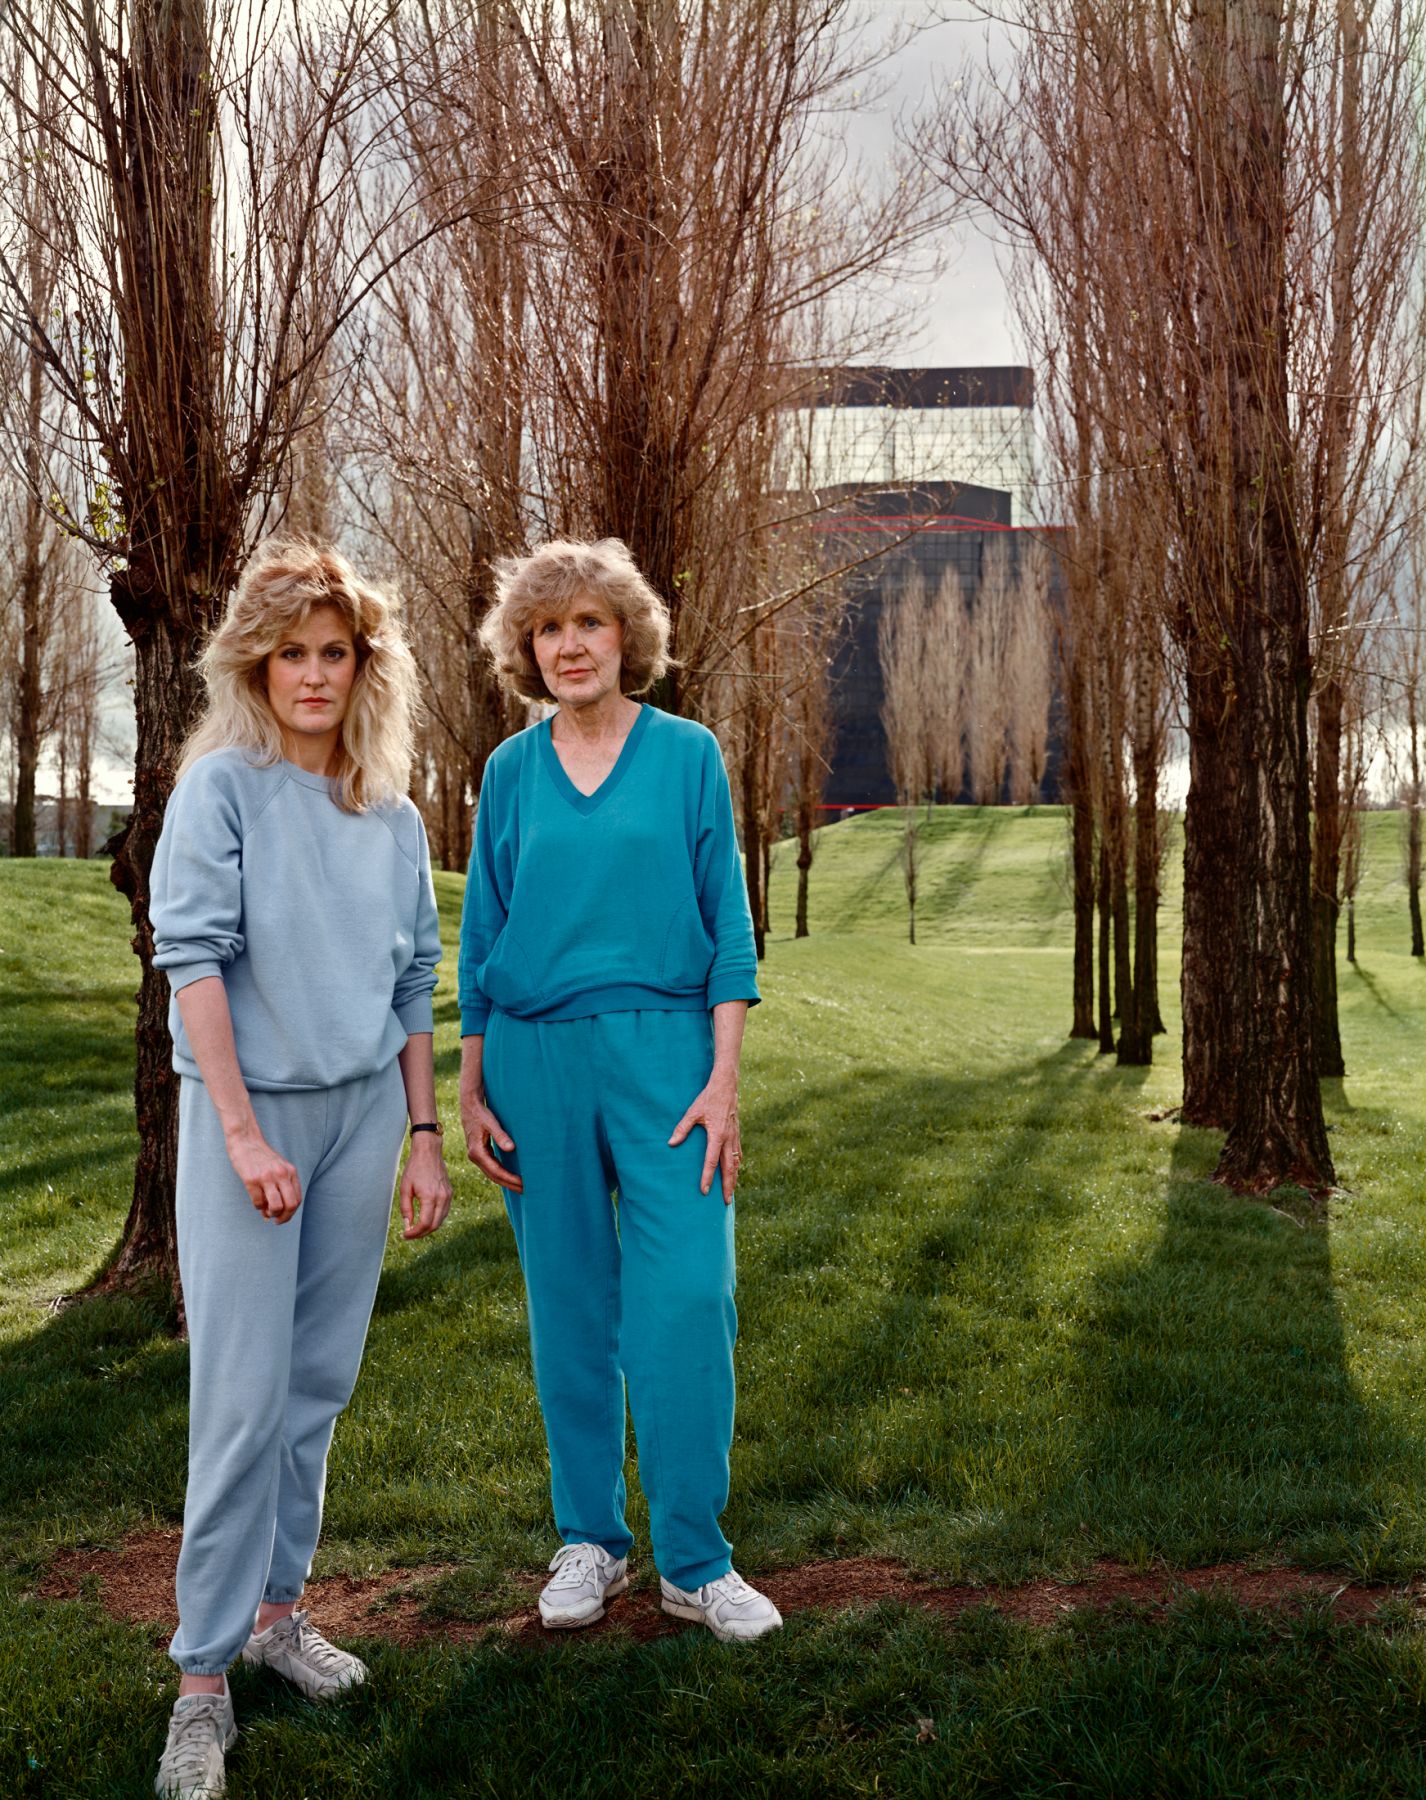 A Mother And Daughter On Their Daily Walk Near The Warner Center In The San Francisco Valley, California, March 1988